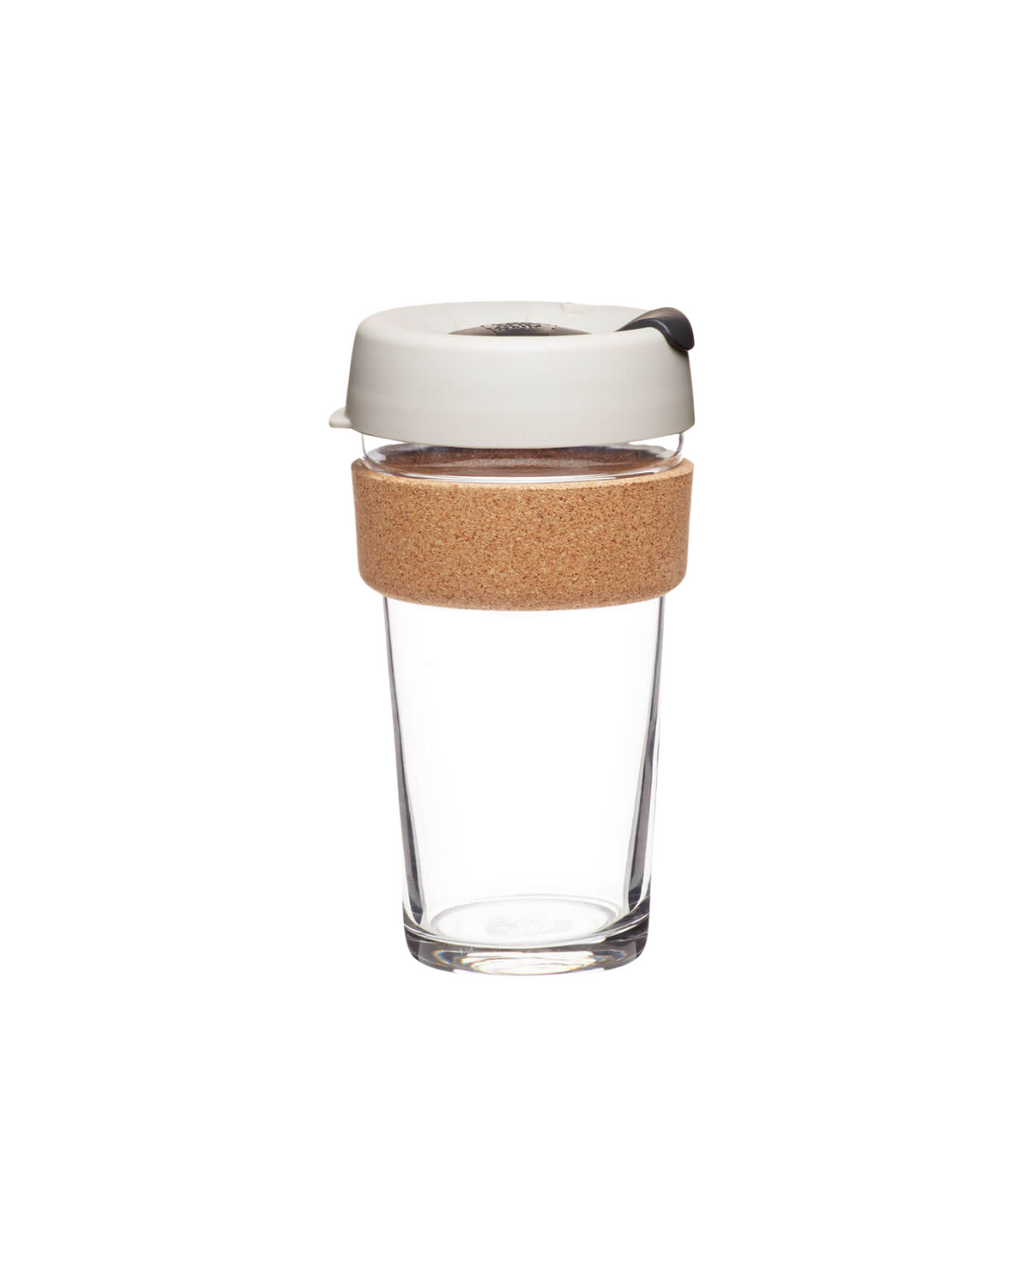 Mother's Day Engraved Cork Band Reusable Glass Coffee Keep Cup